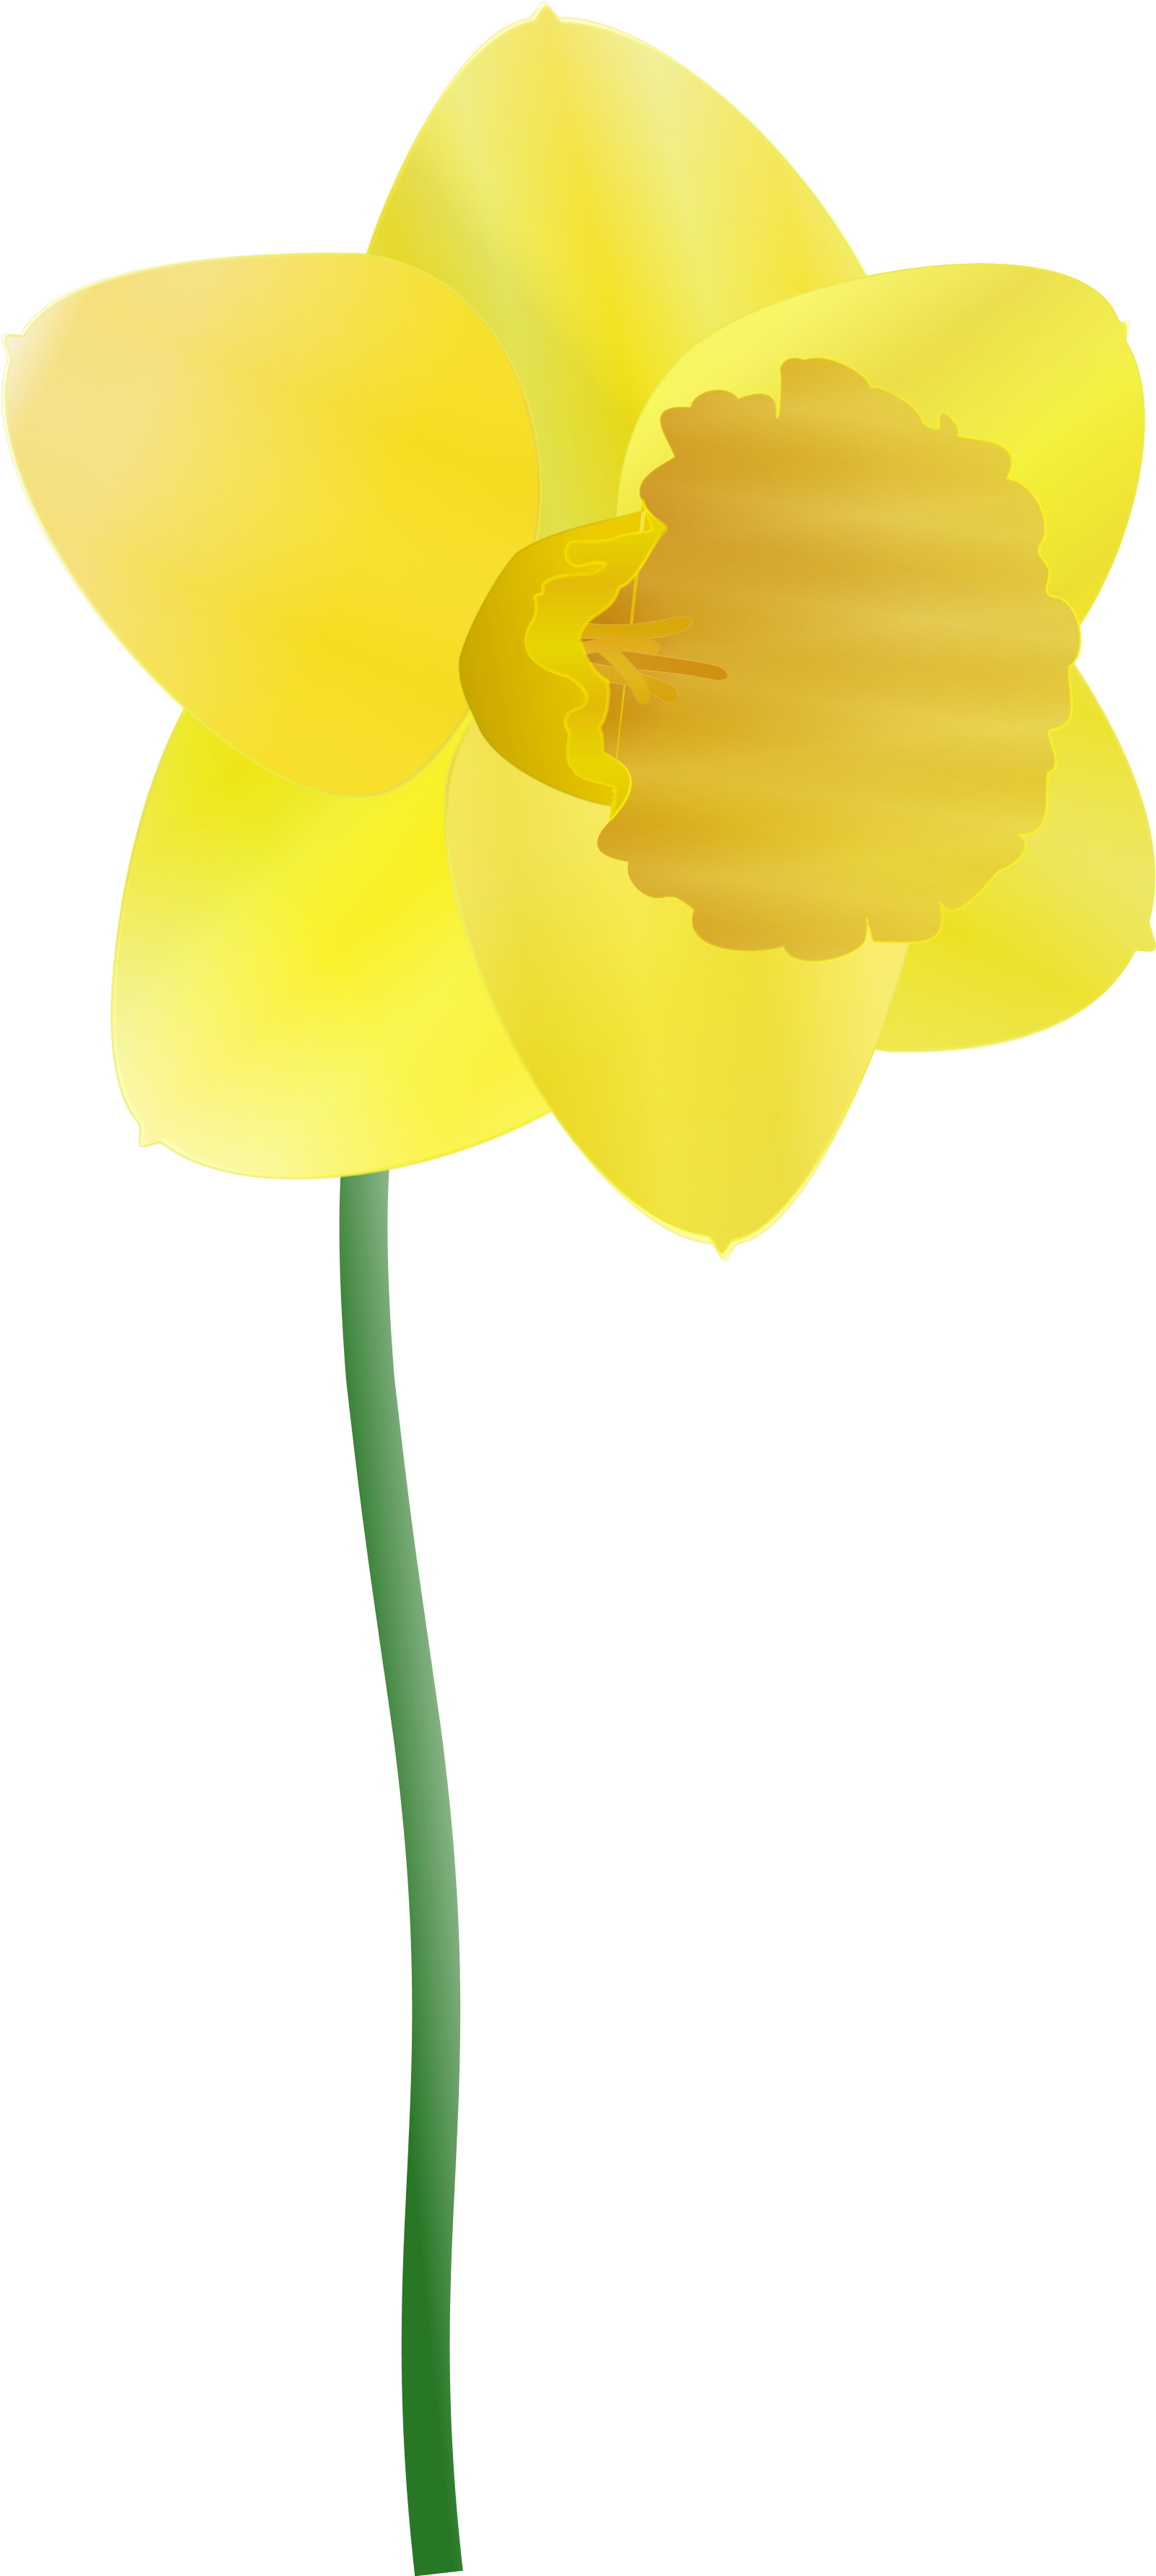 Yellow Narcissus Flower Illustration PNG